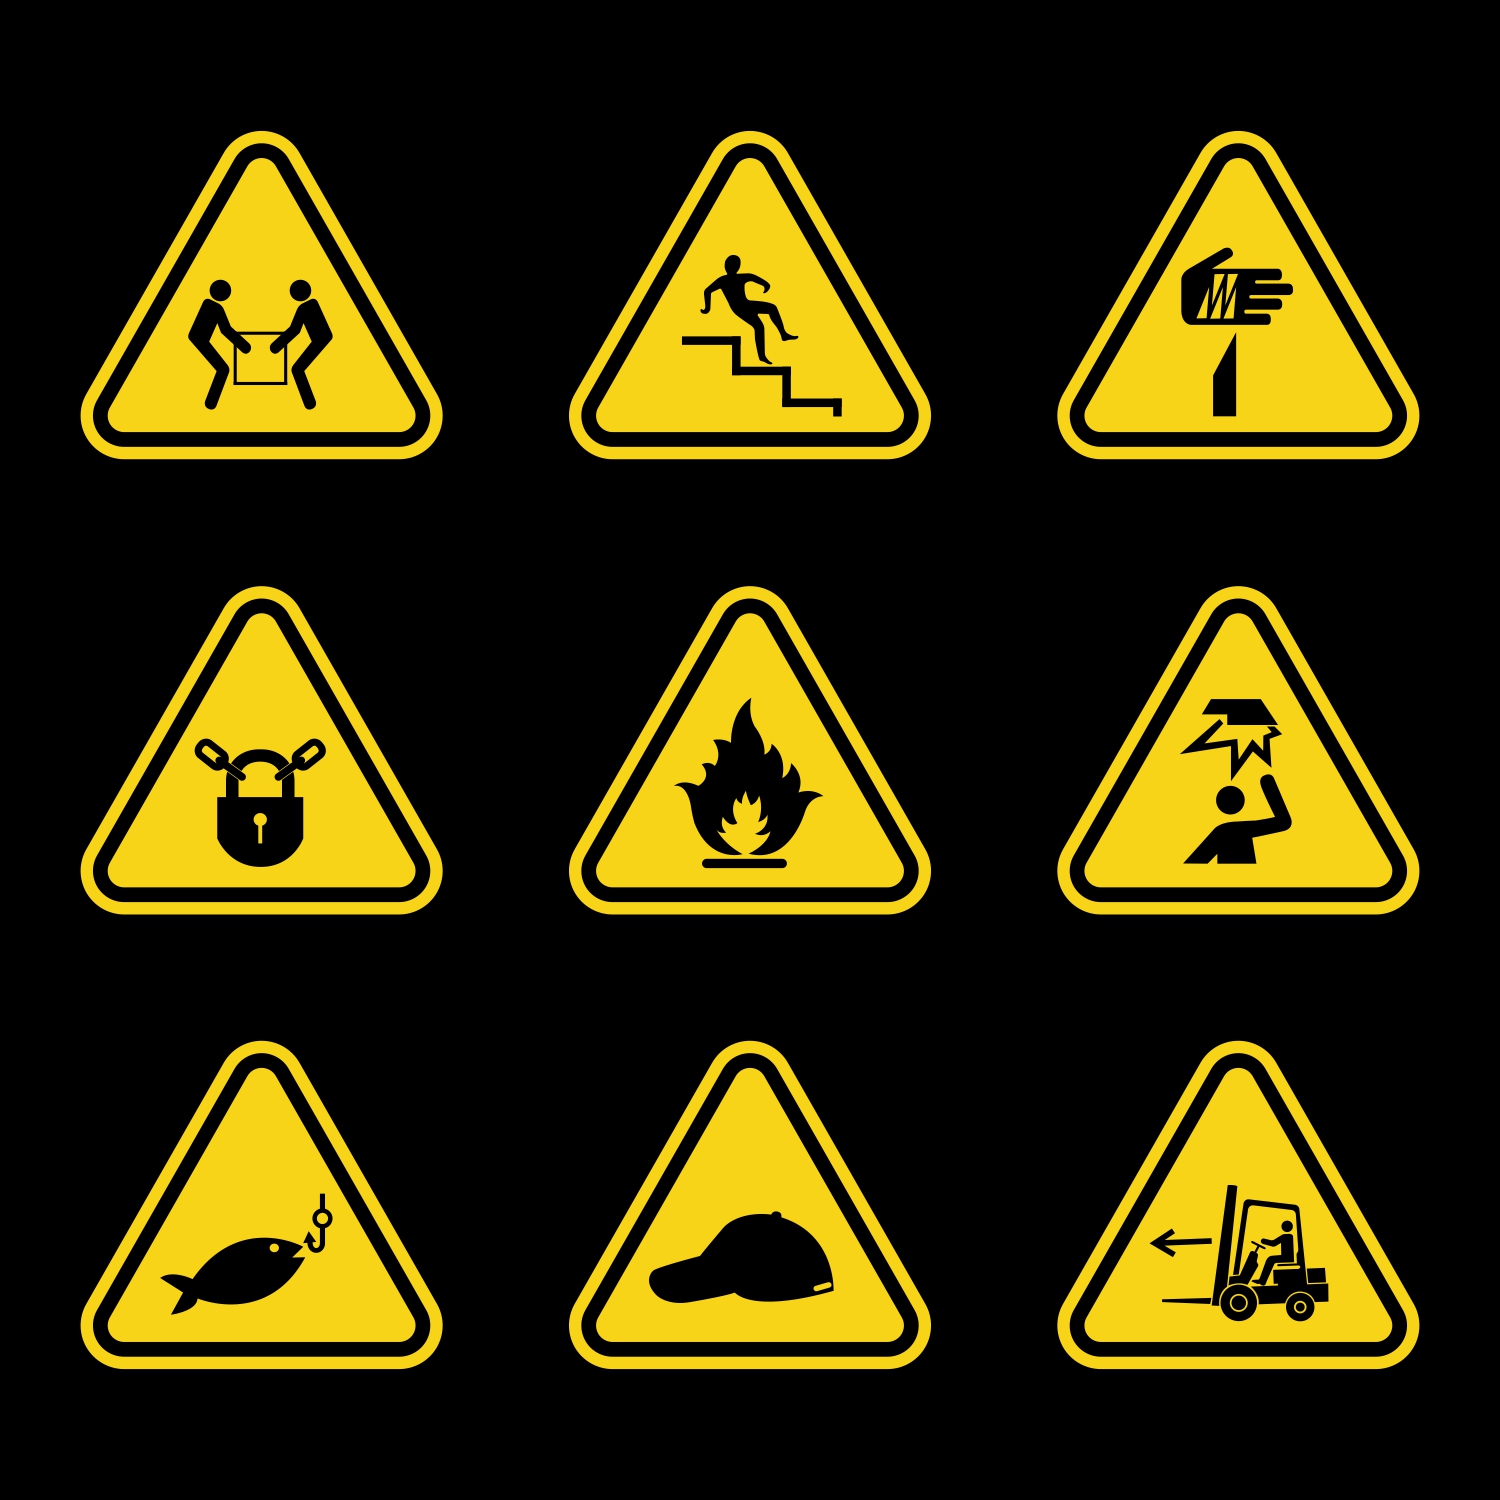 free vector Warning Sign Set with Black Icons in Yellow Triangle CDR file download for free